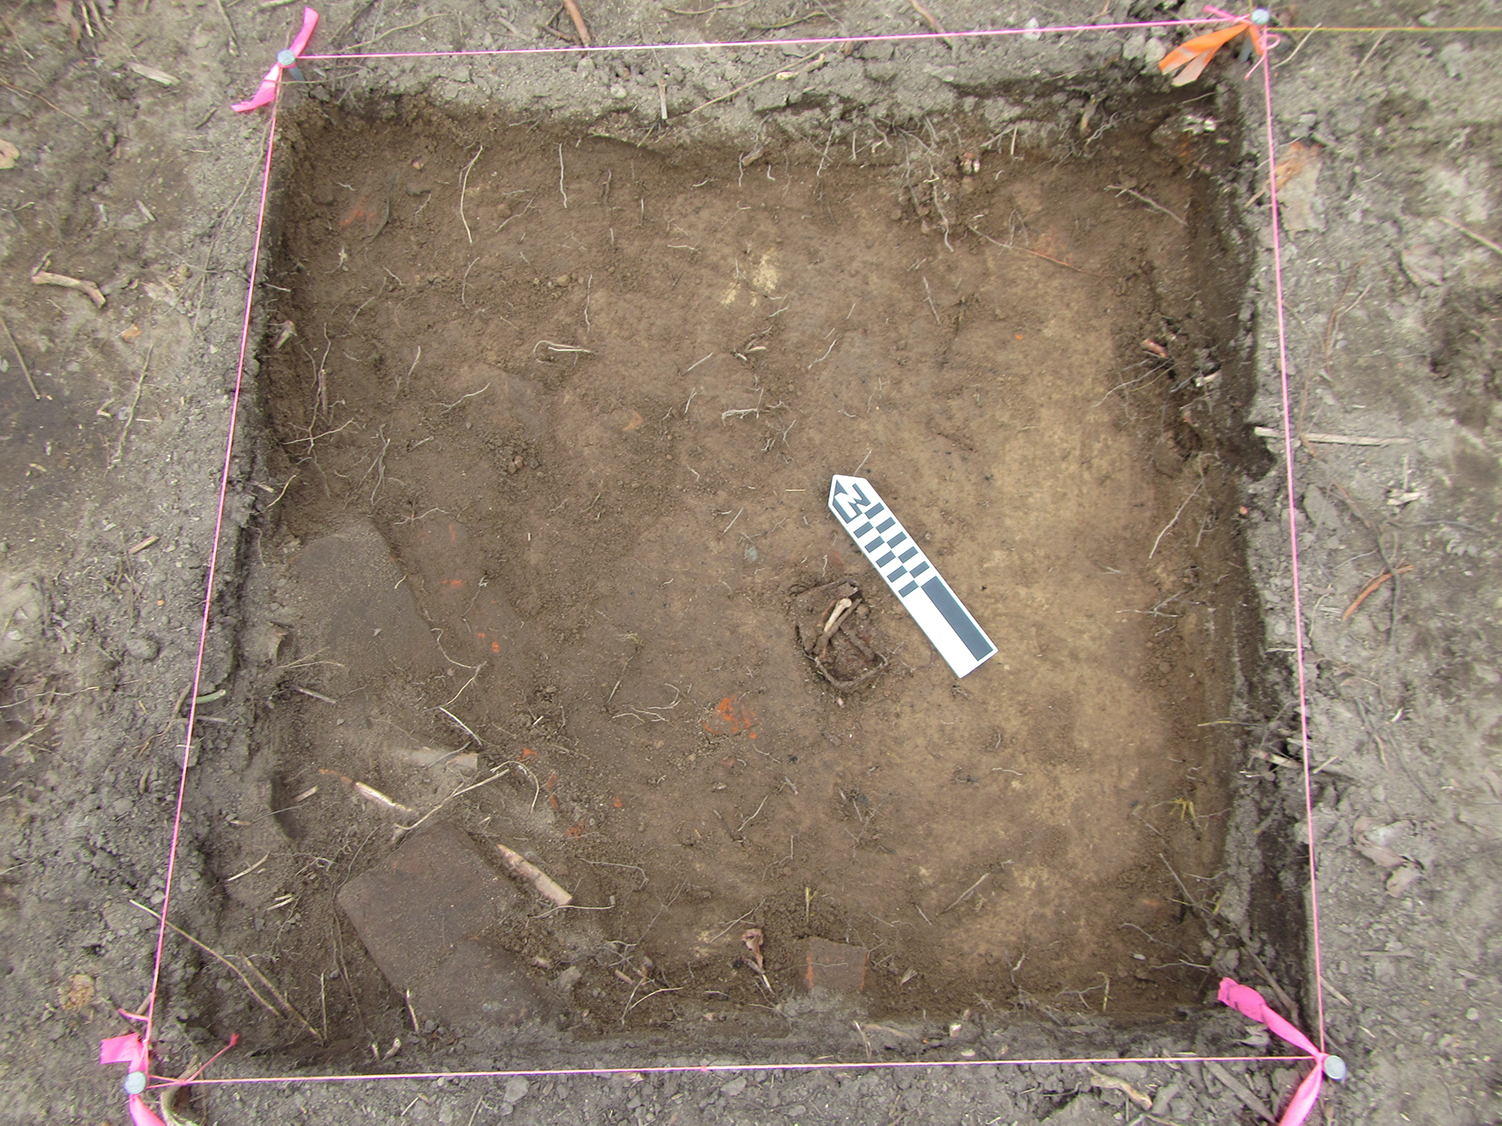 A color photograph of a 1 meter excavation unit with a metal can containing a bone within it, with a black and white north arrow scale bar next to it.